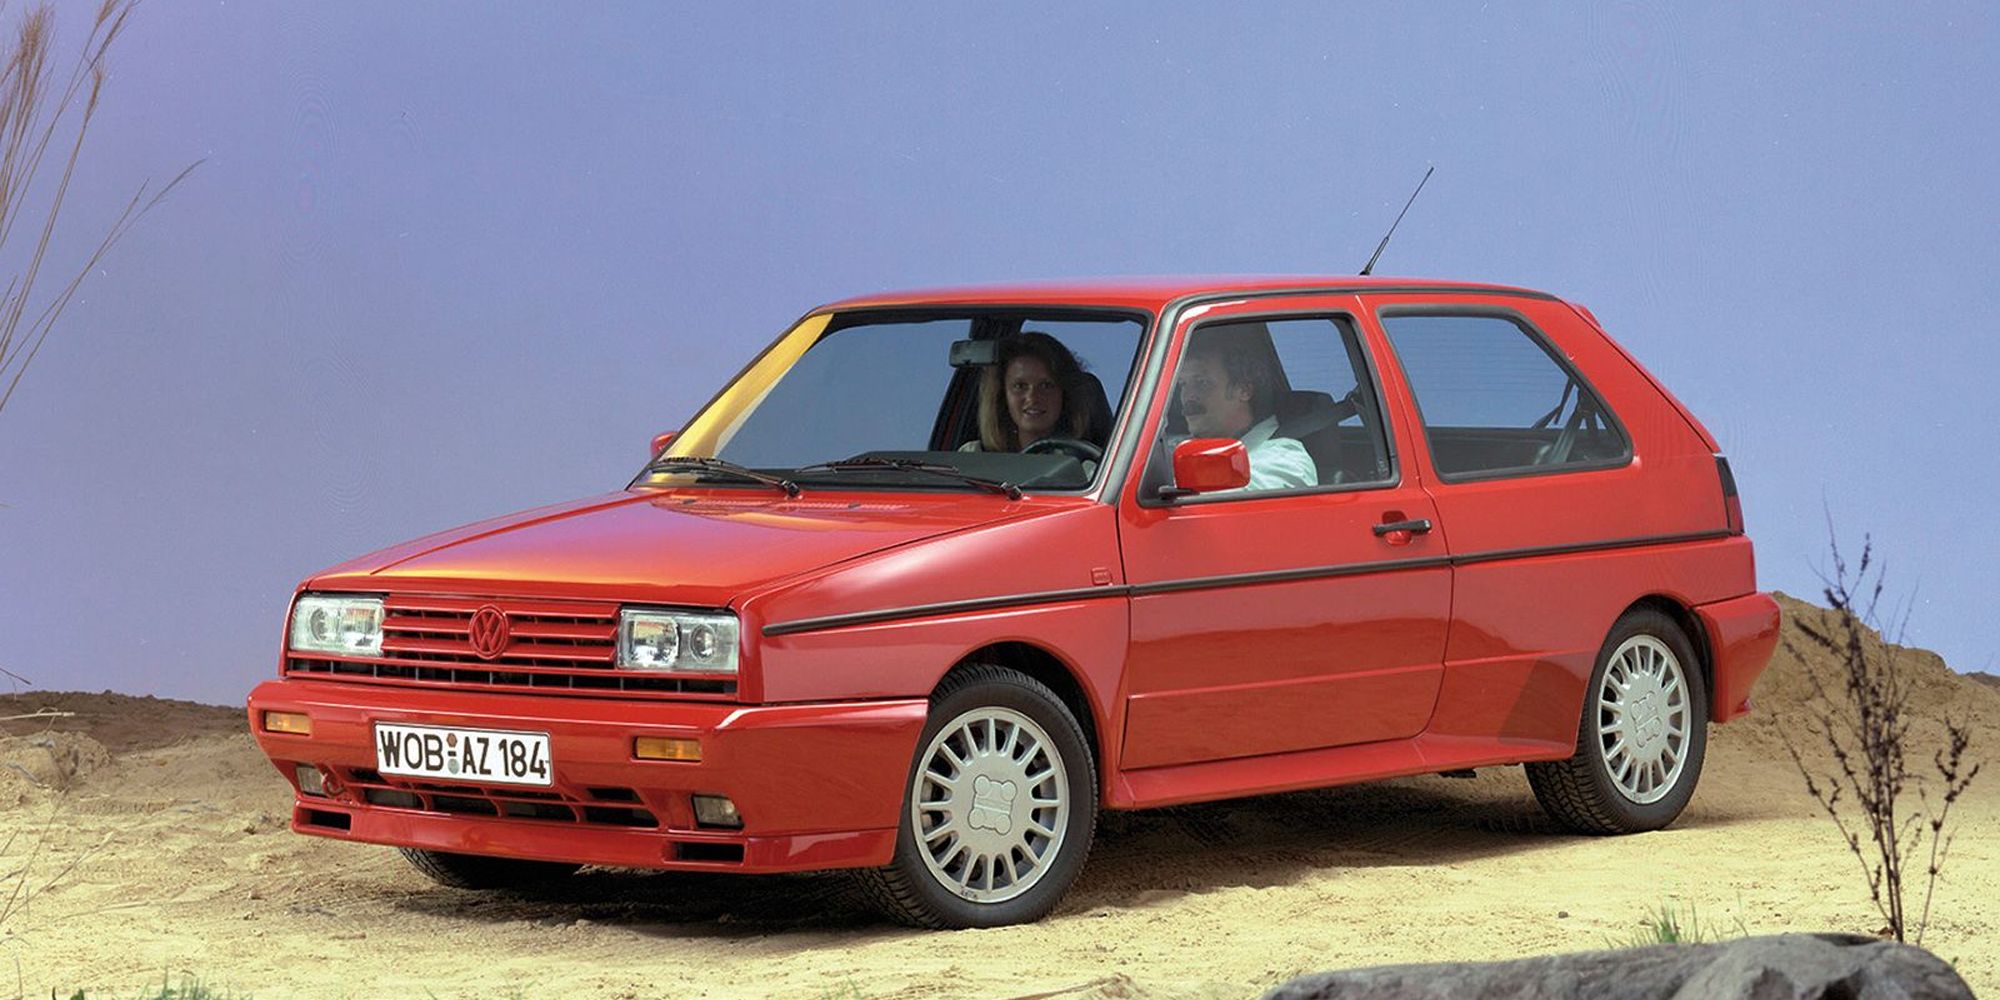 The Golf G60 Rallye in red